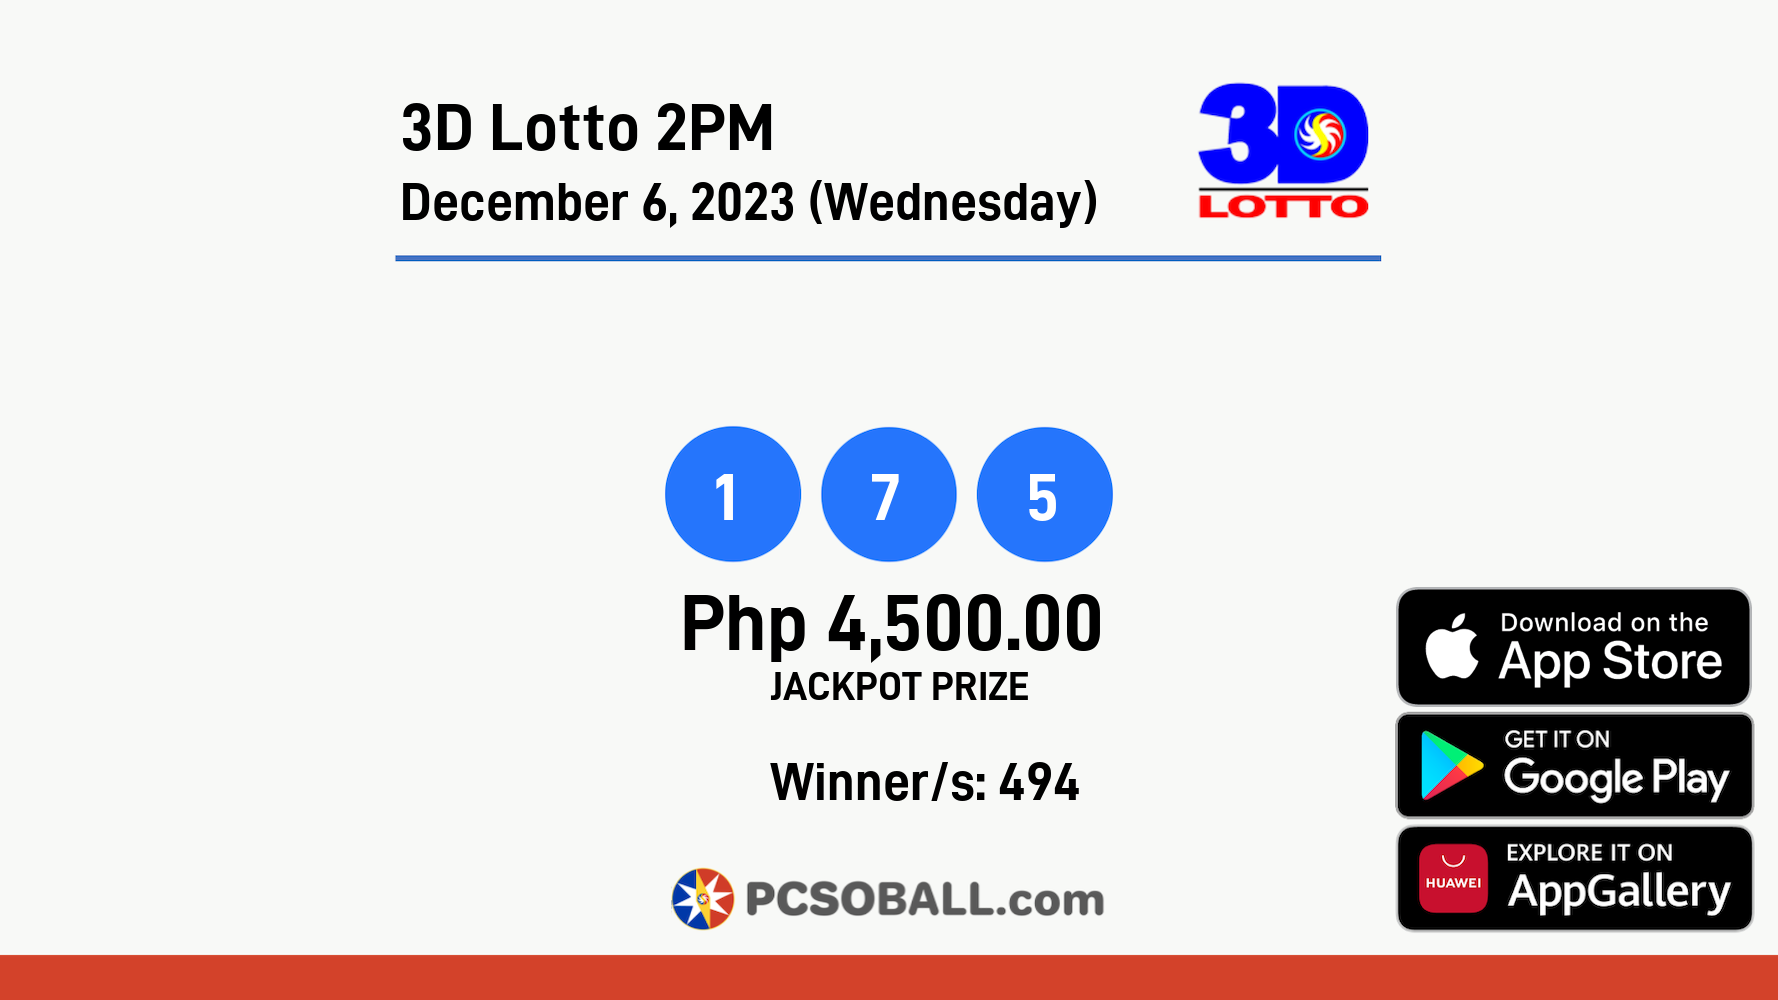 3D Lotto 2PM December 6, 2023 (Wednesday) Result